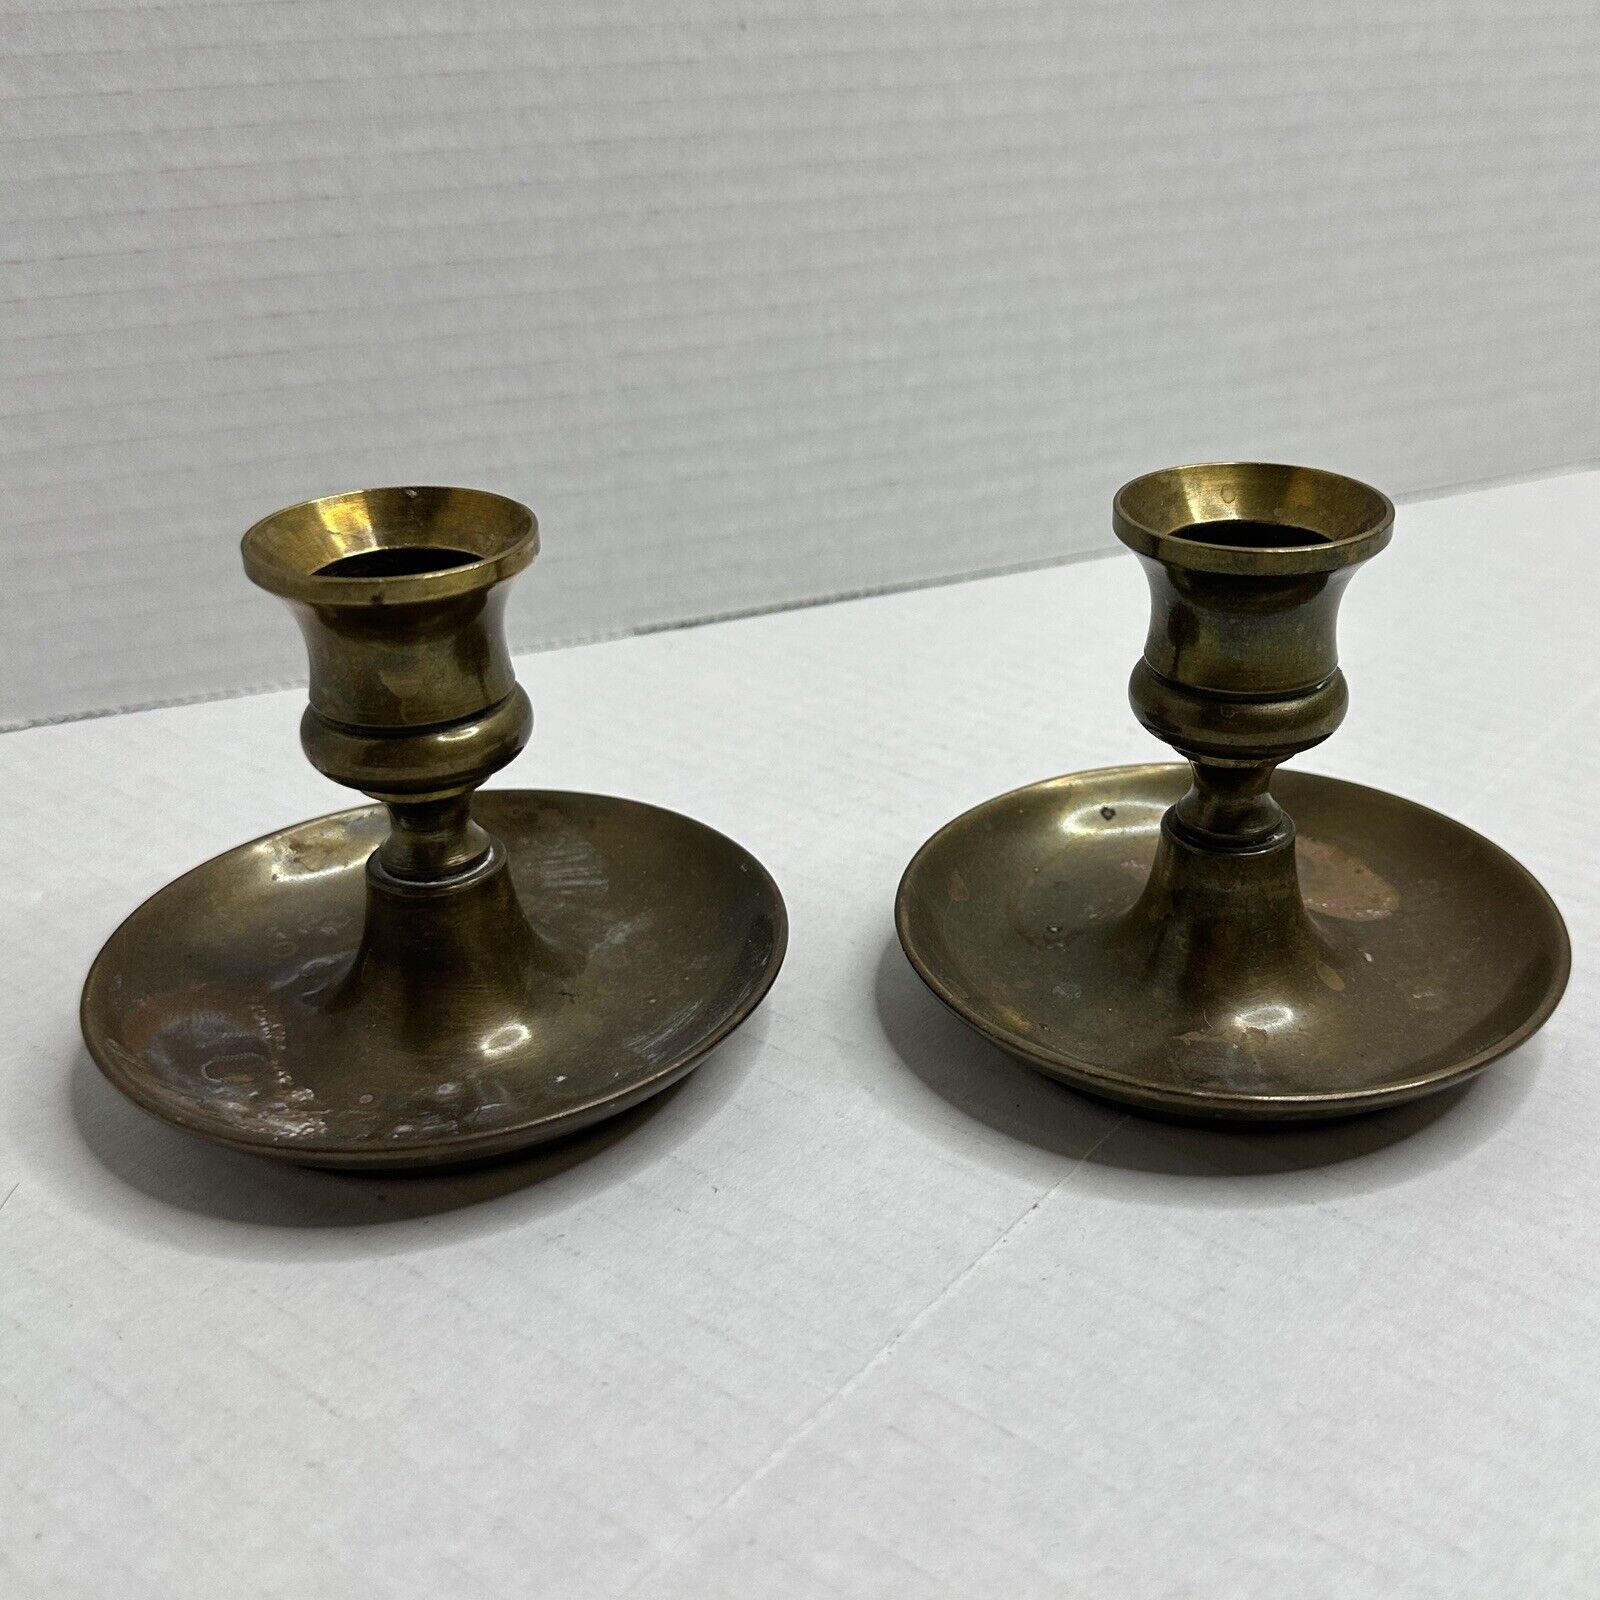 Vintage Pair Brass Candlesticks 2.75” Tall Table Candle